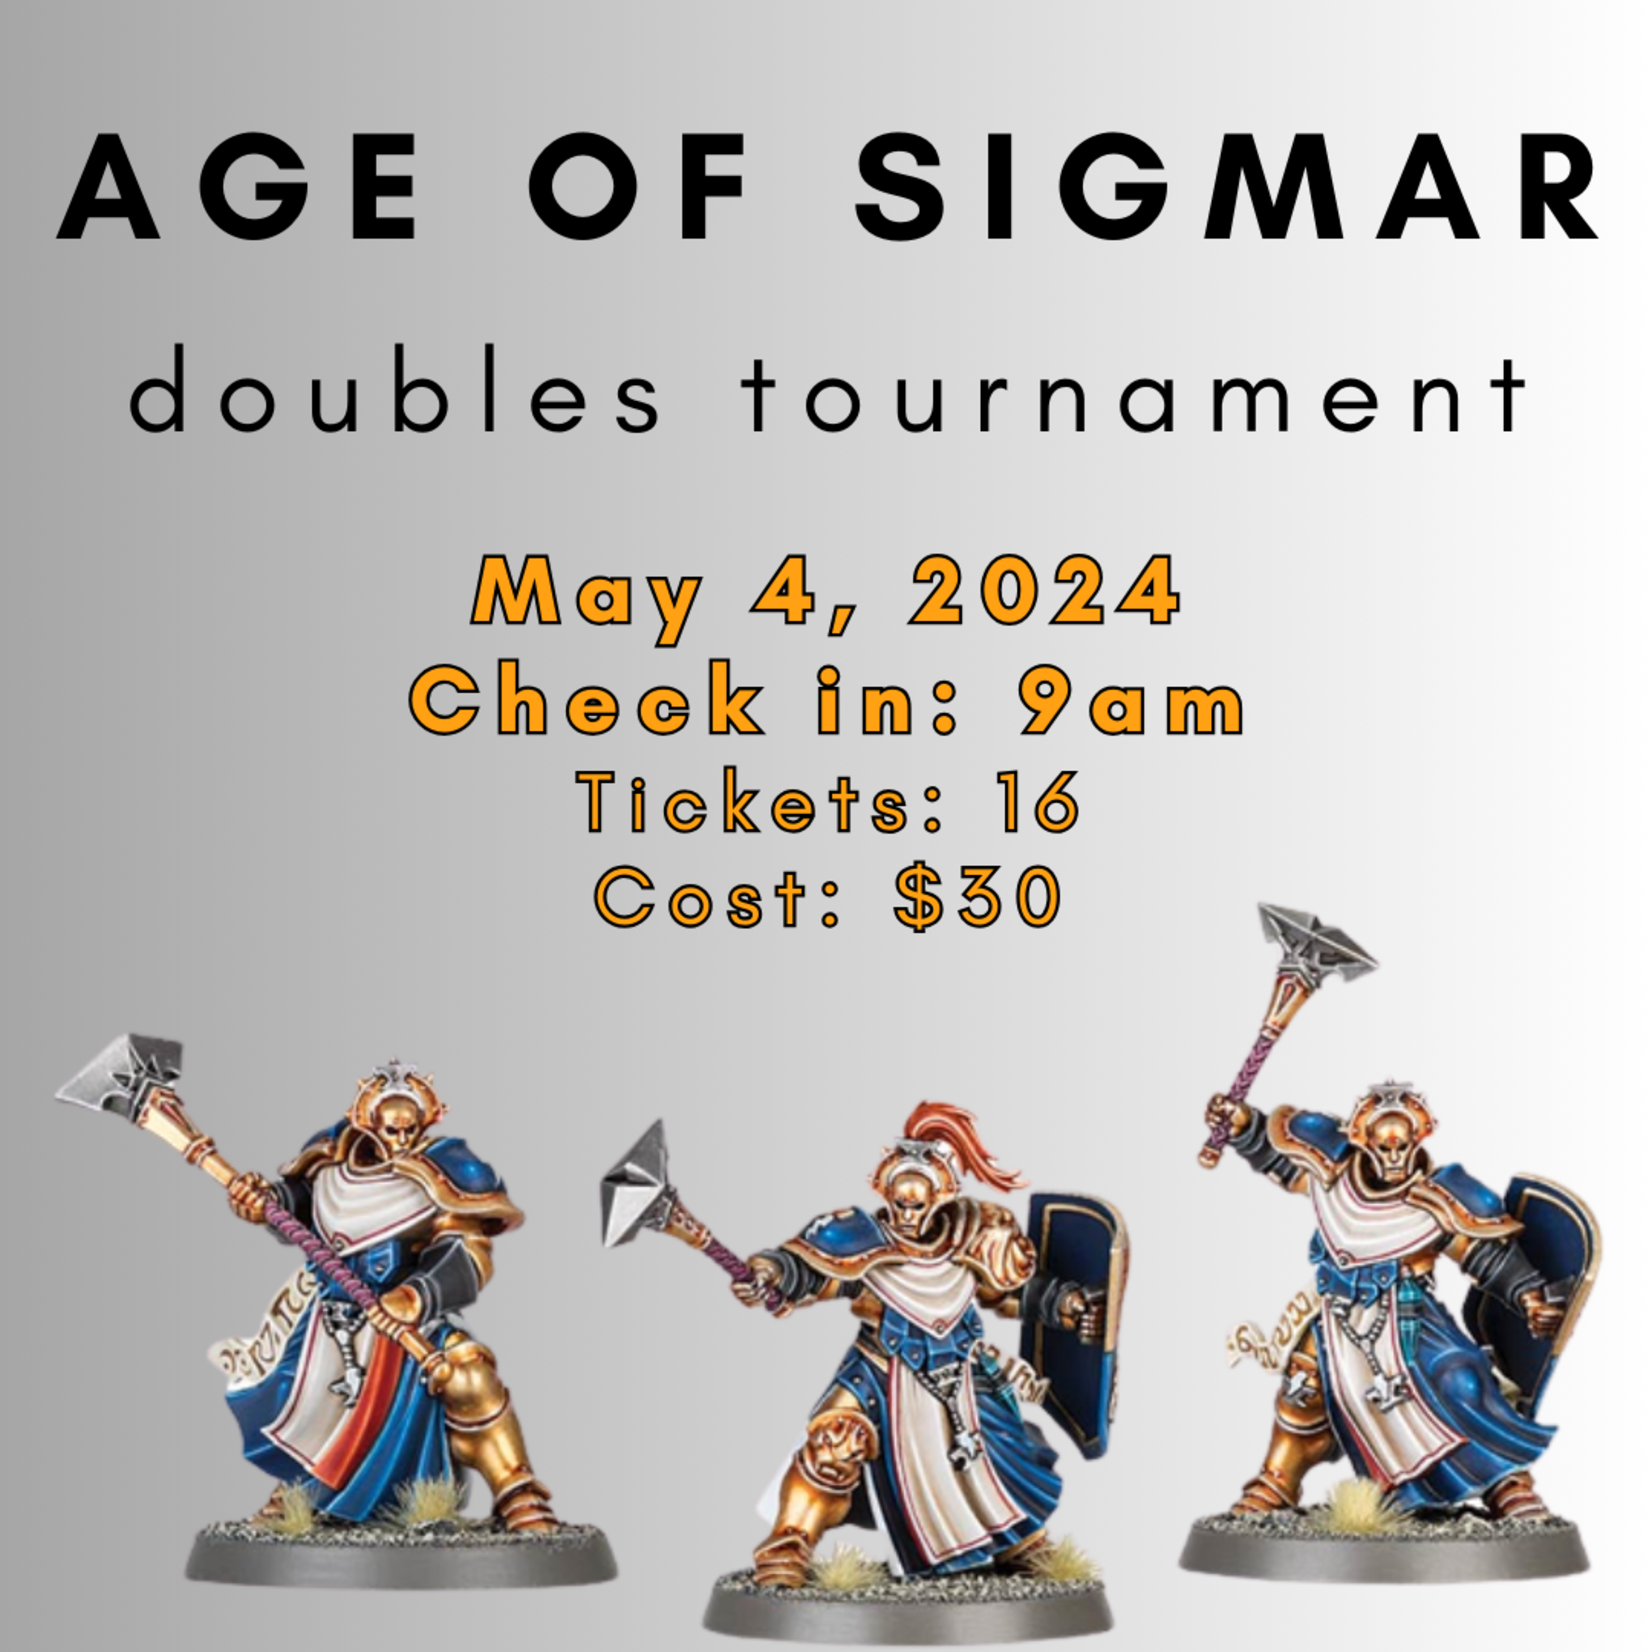 5/04/24 - Age of Sigmar Doubles Tournament